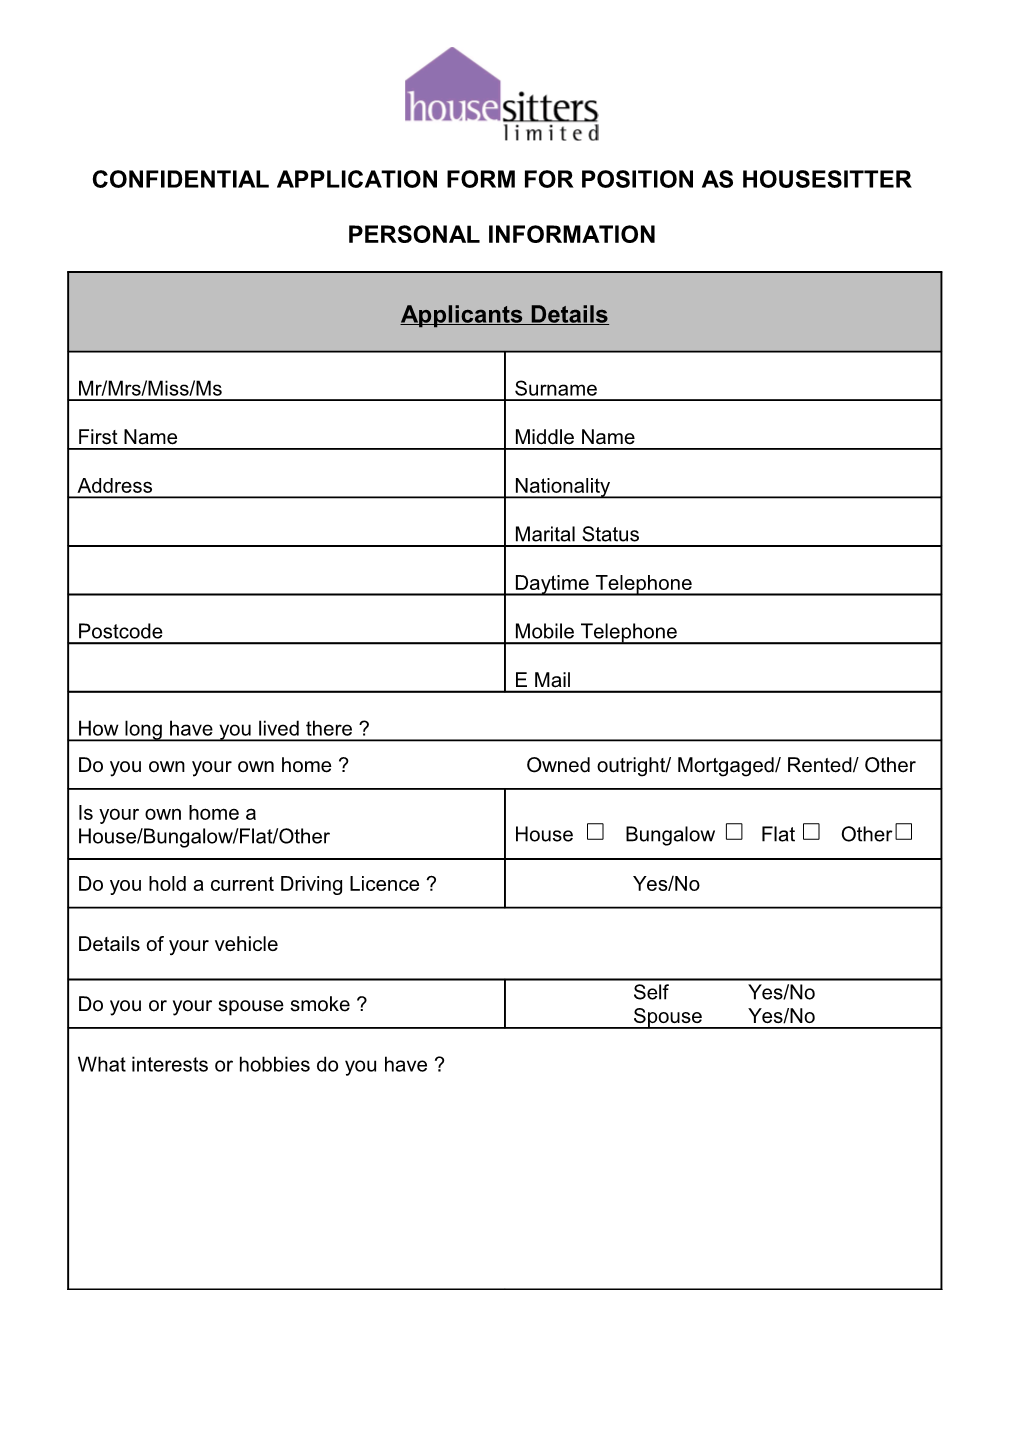 Confidential Application Form for Position As Housesitter